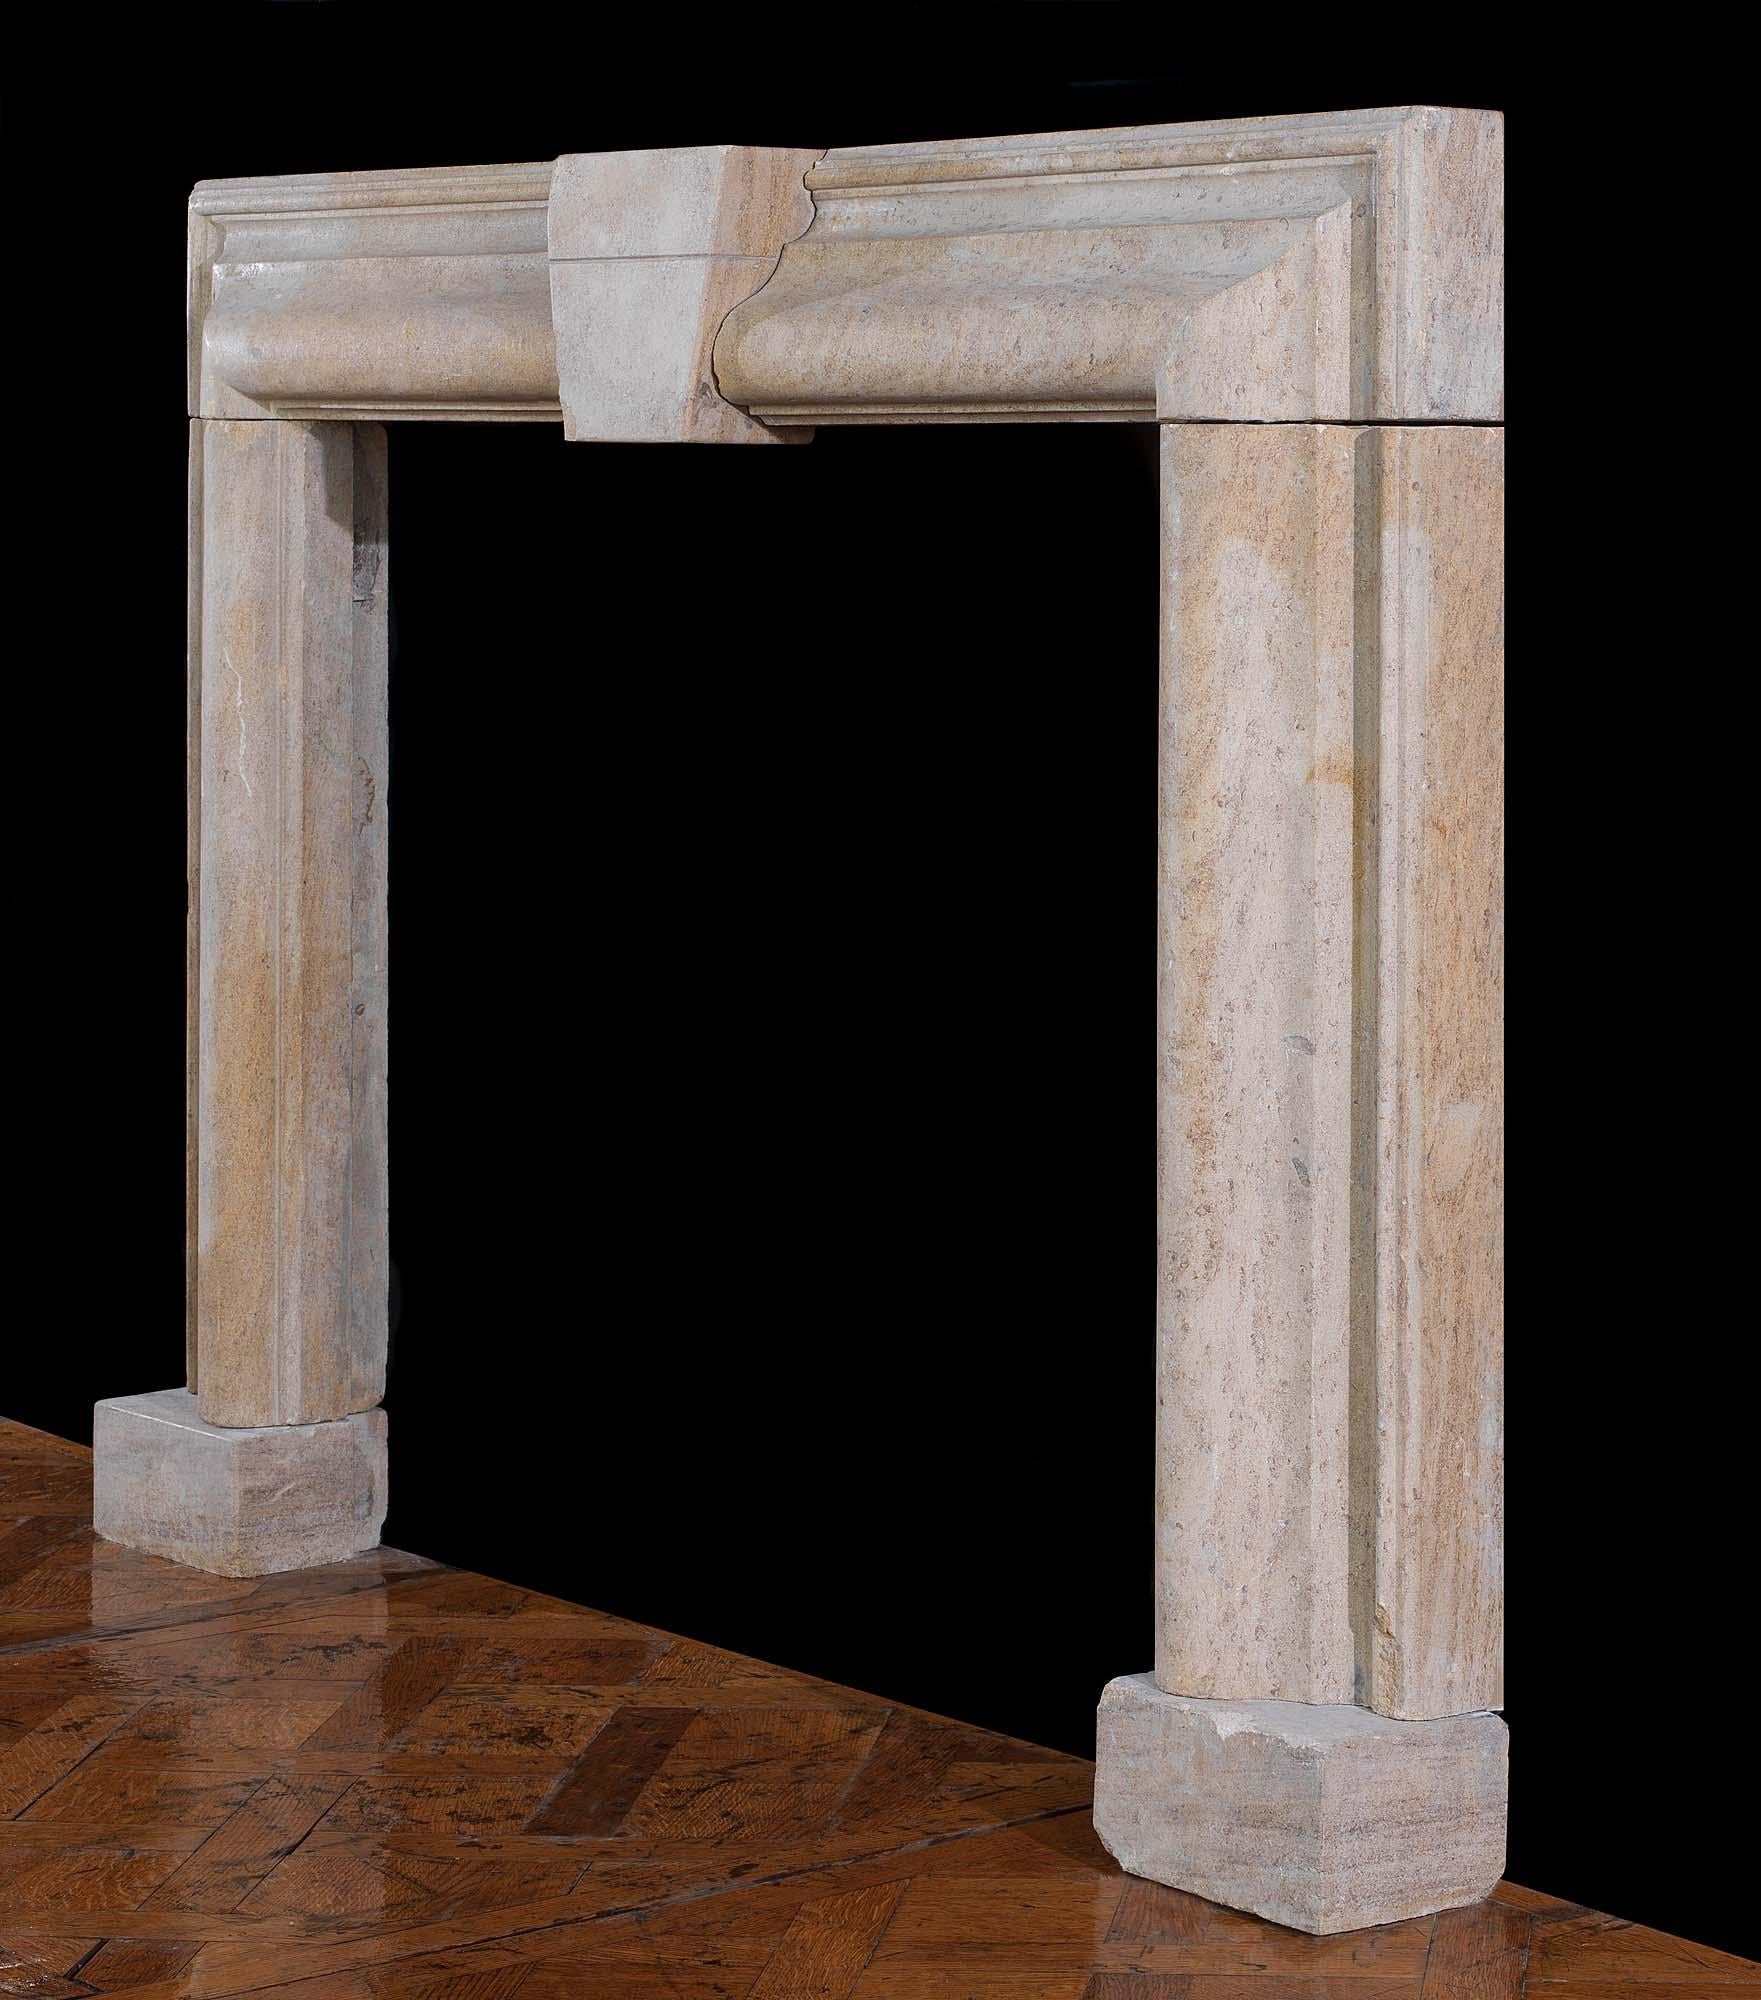 A substantial Bolection chimneypiece carved from beautiful soft grey, salmon brown and taupe Derbyshire Fossil Limestone with a large central keystone. This stone is quite hard and will take a polish. English, circa 1860.

Notes: Derbyshire Fossil